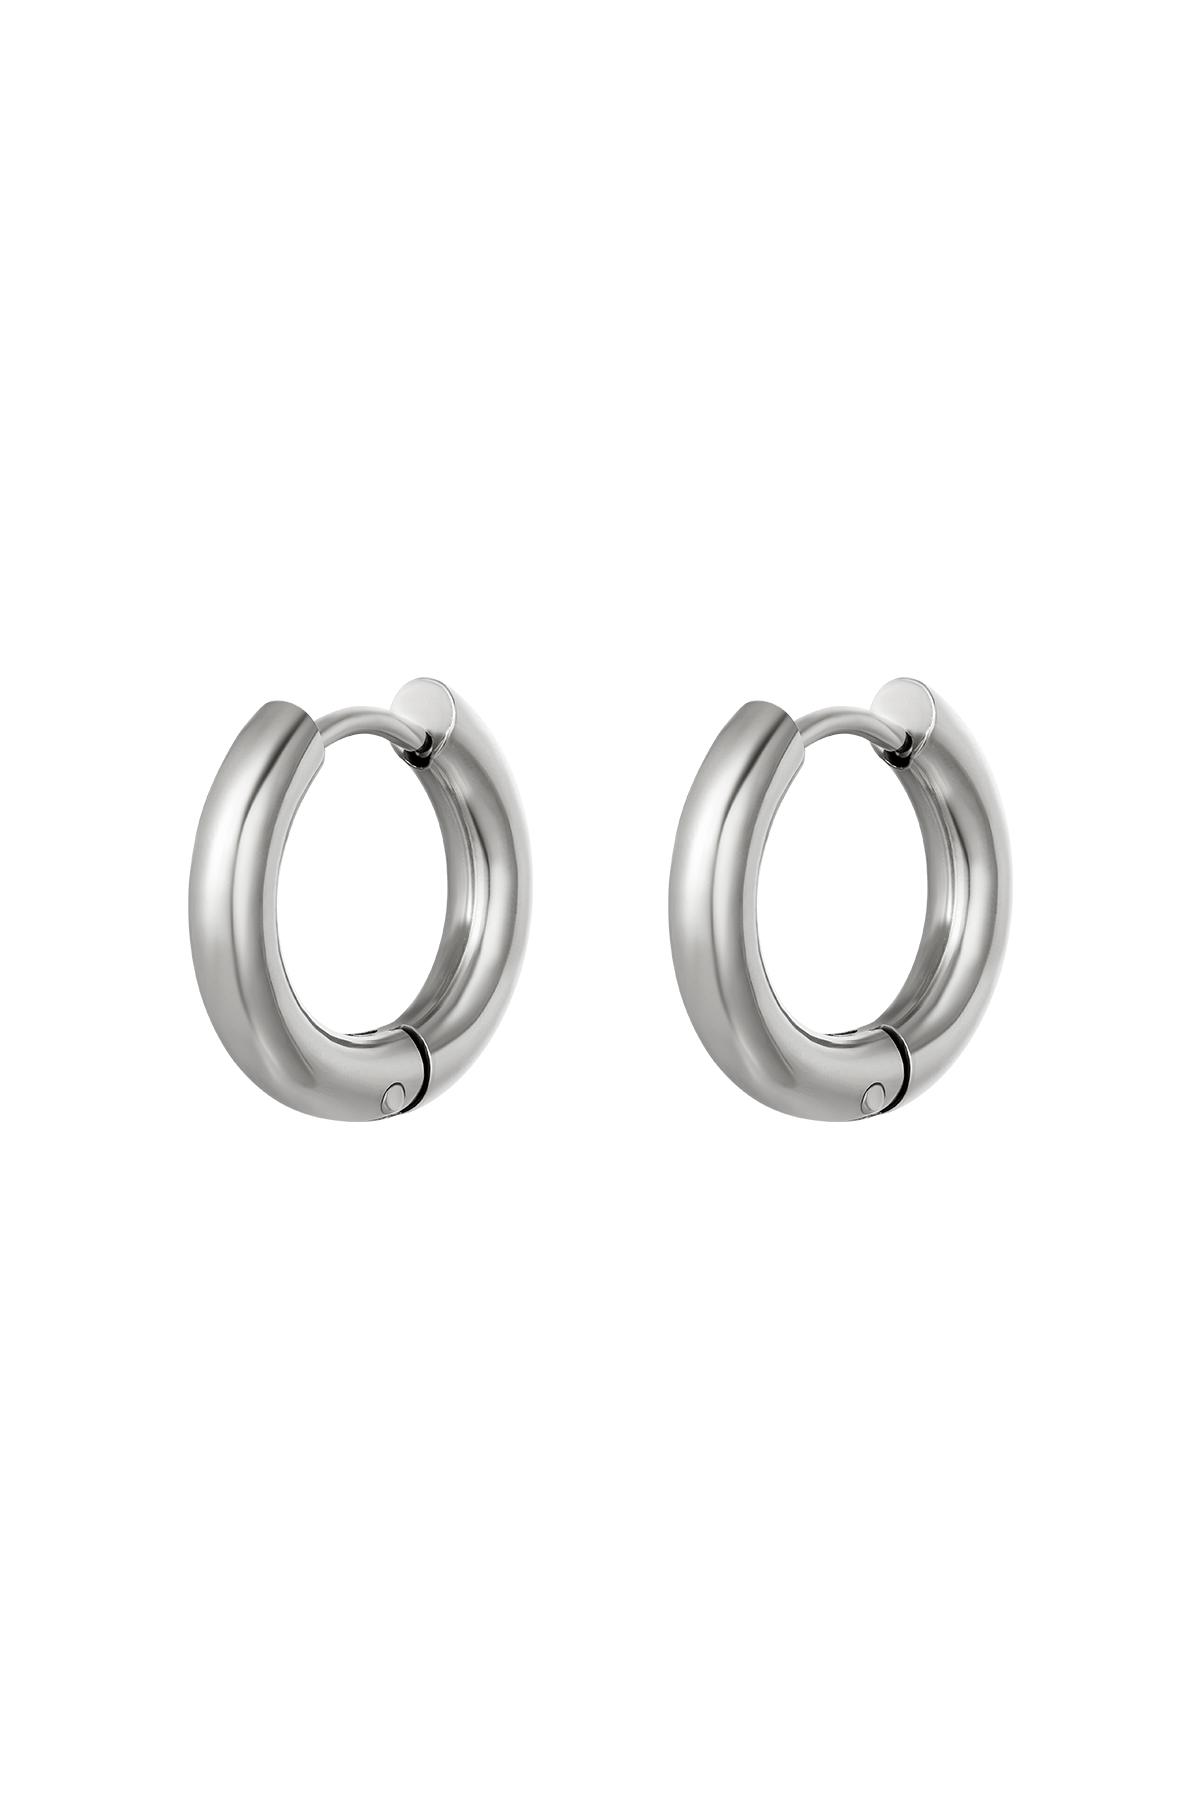 Basic creoles earrings - small Silver Stainless Steel